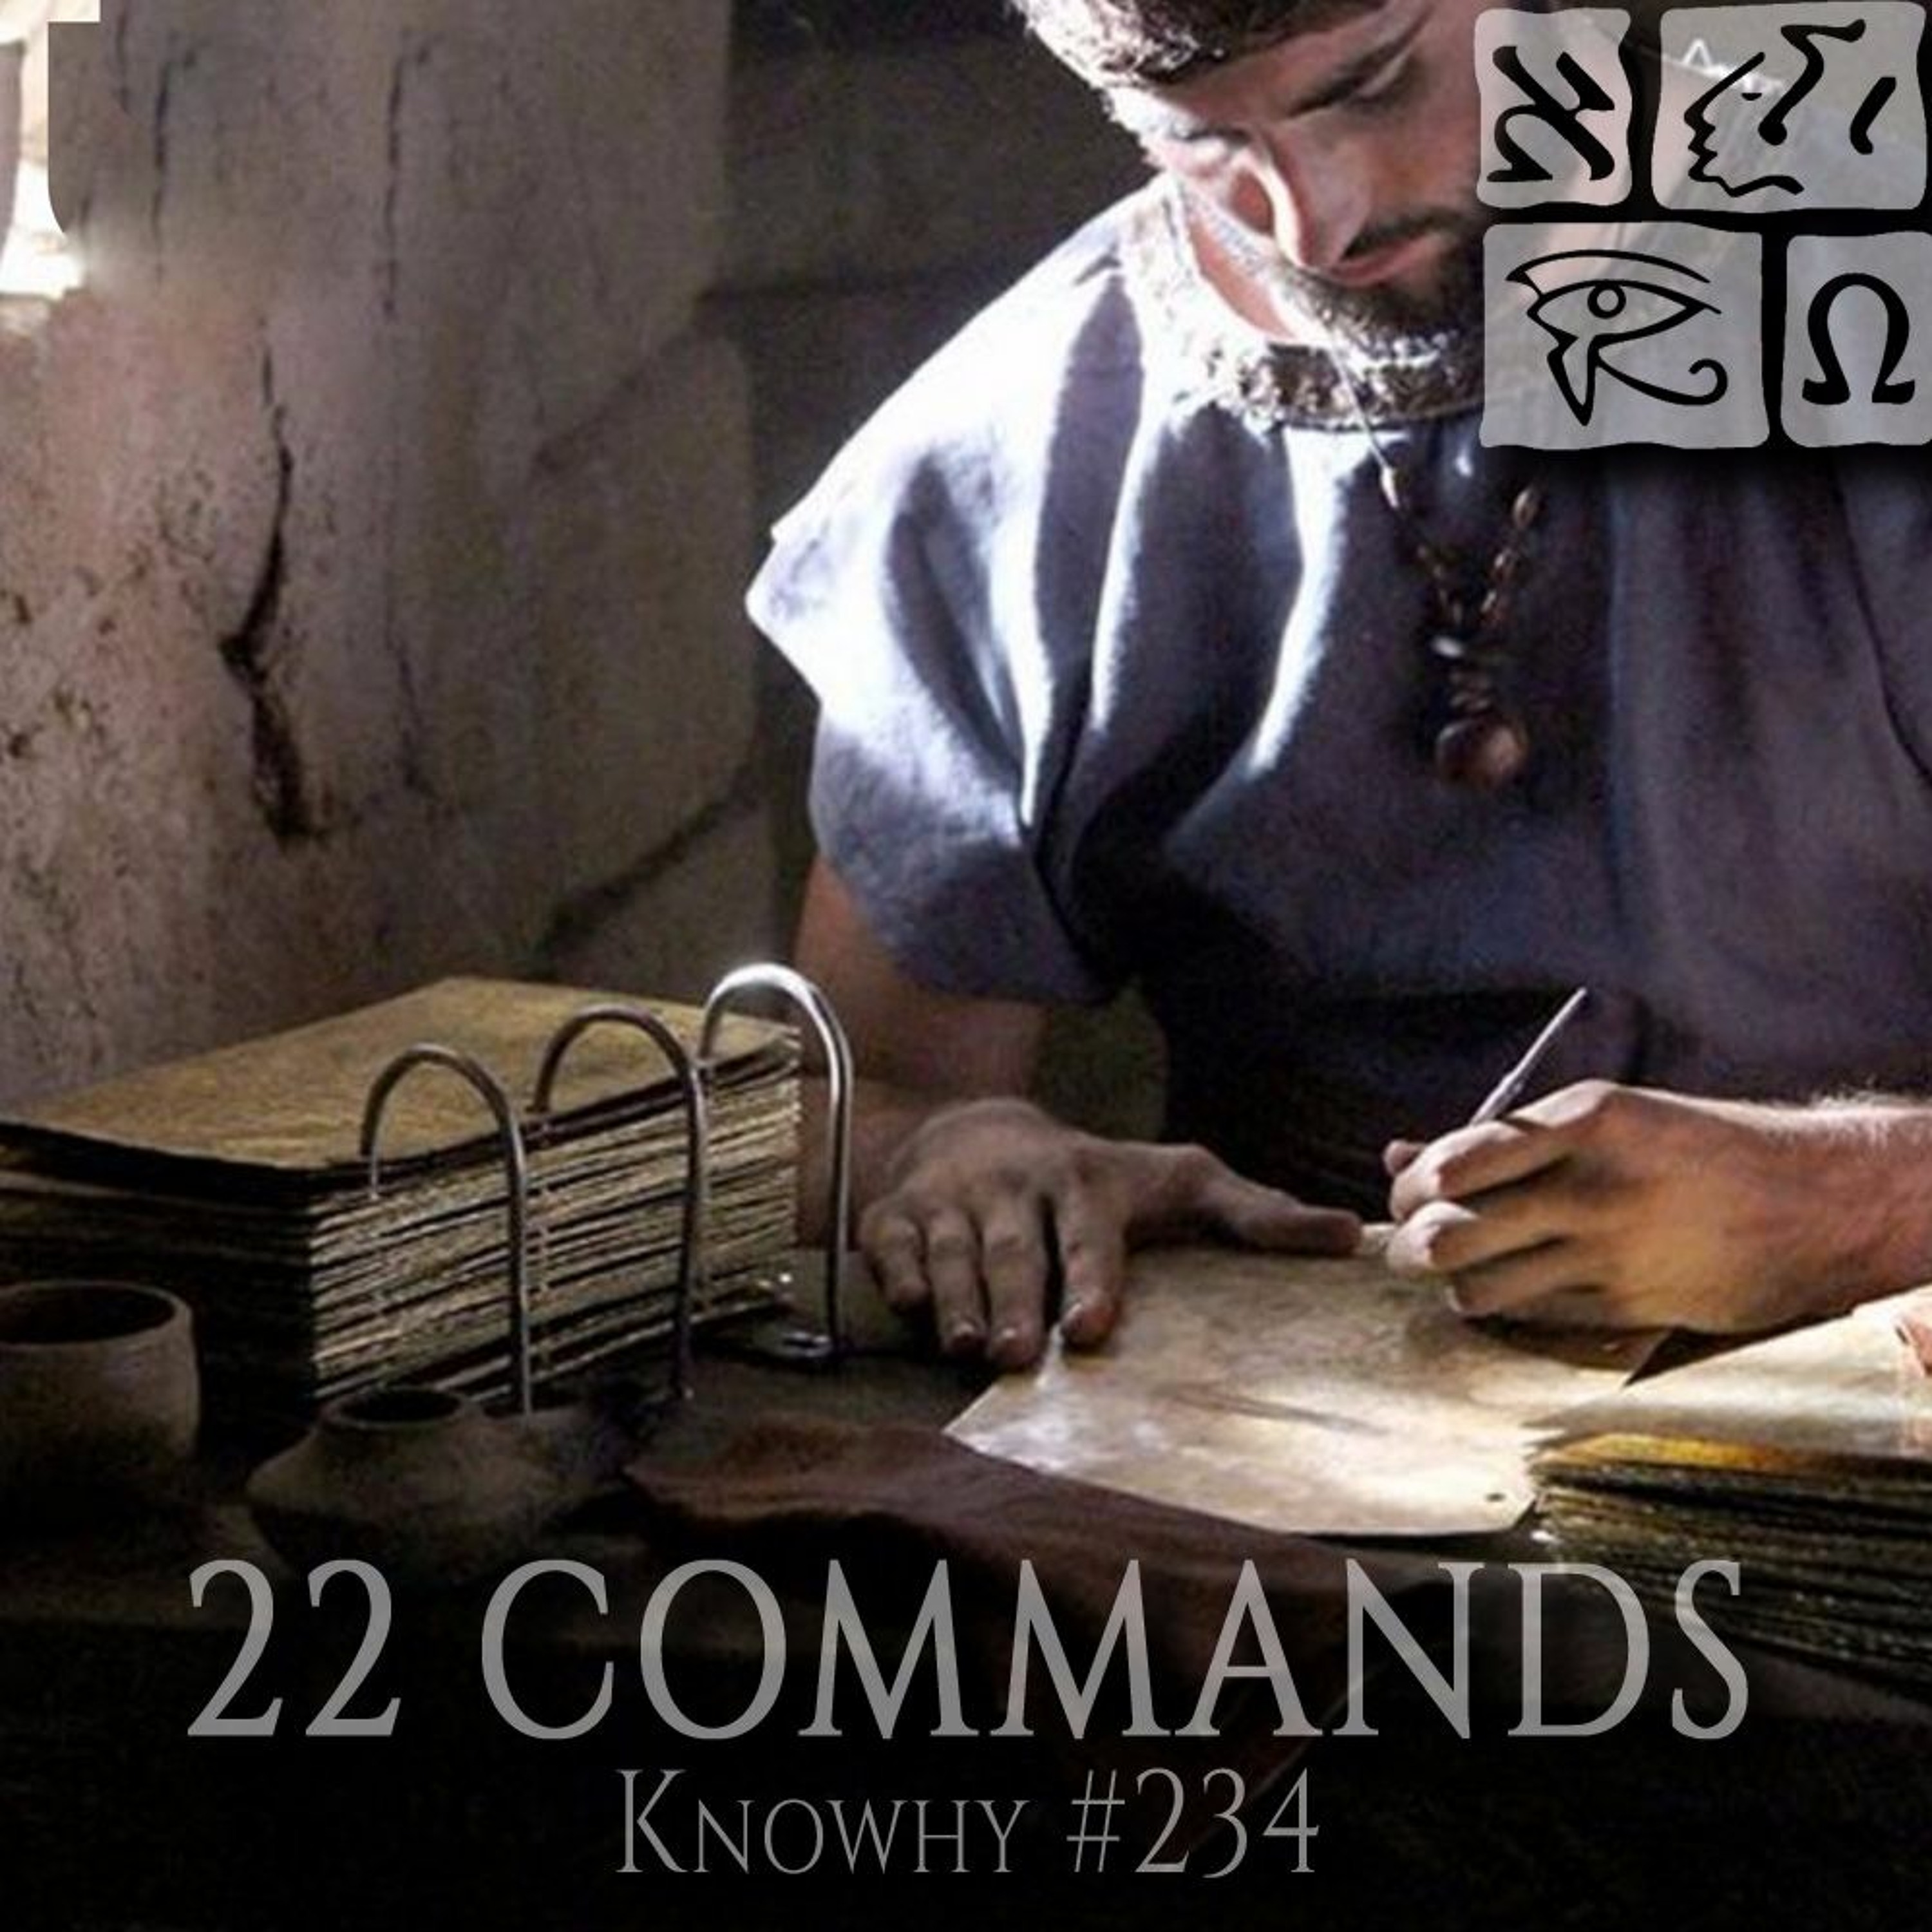 Why Did Moroni Conclude His Father’s Record With 22 Commands? #234